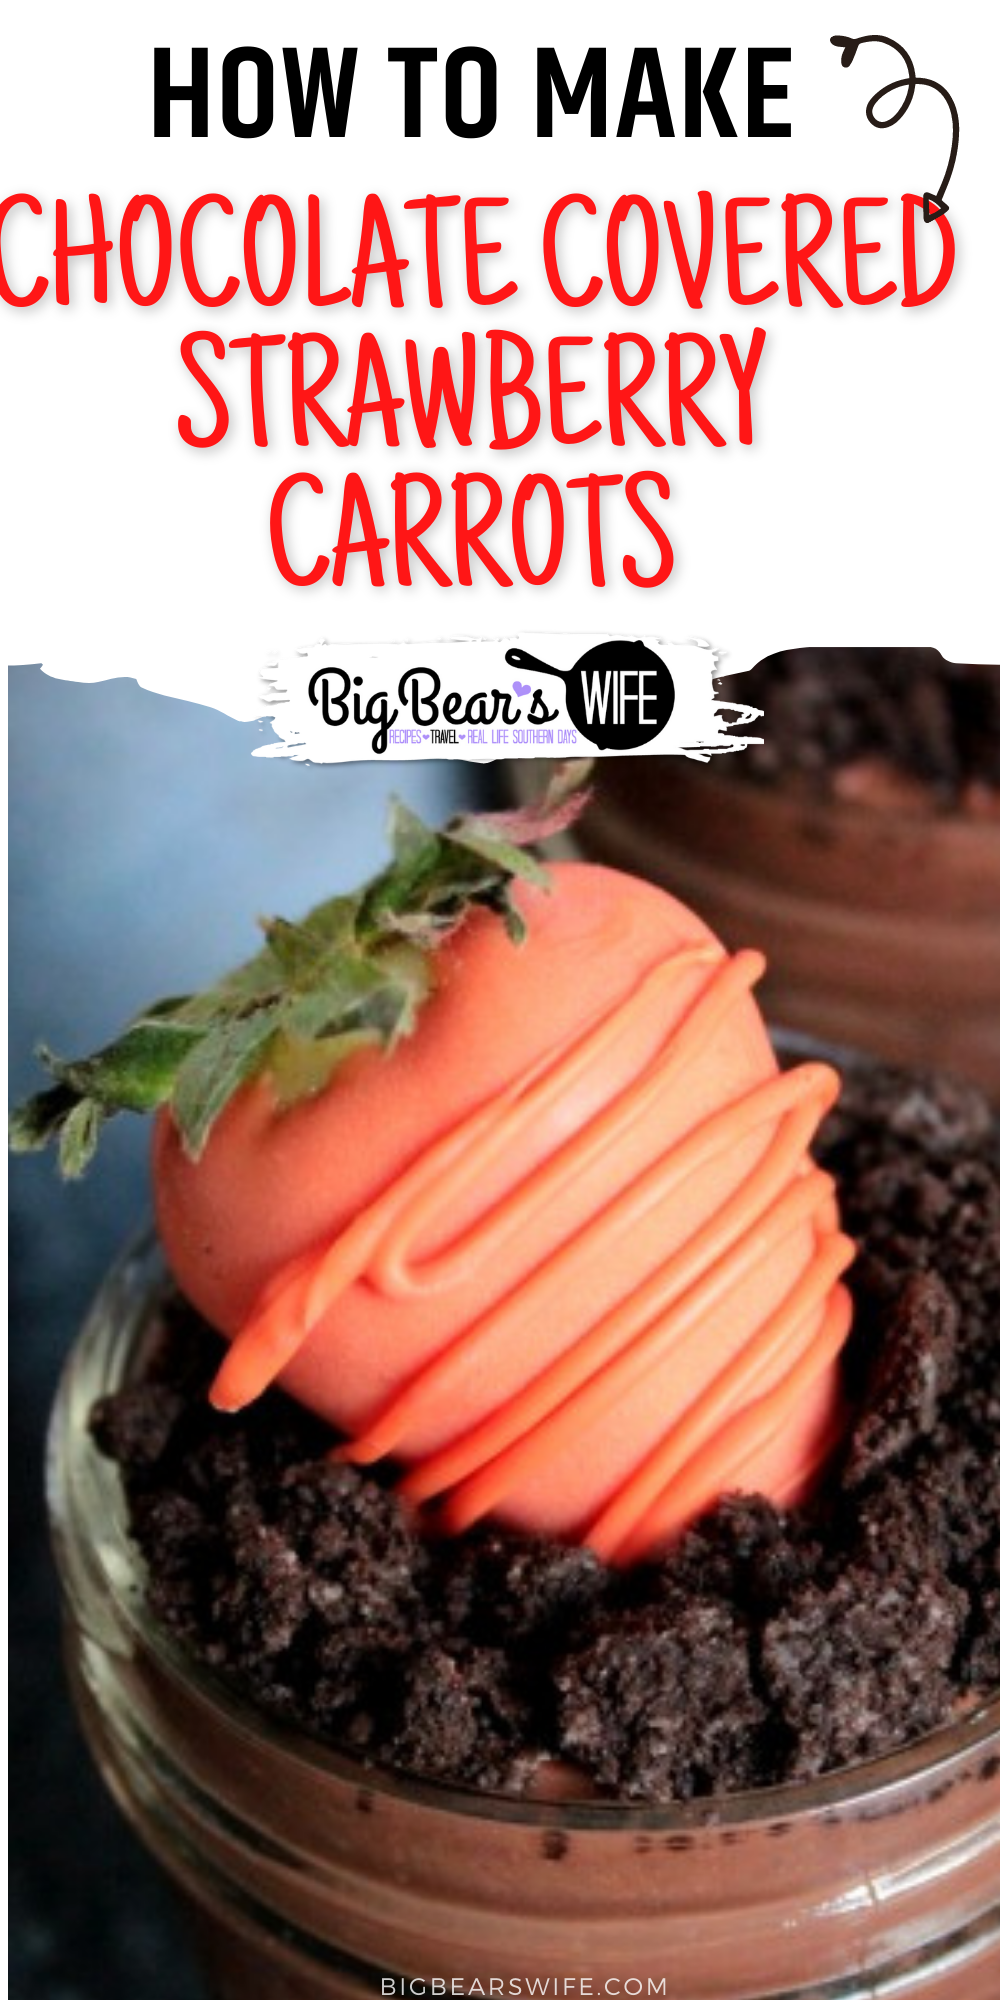  These cute spring dessert pudding cups are topped with easy to make Chocolate Covered Strawberry Carrots! They’re the perfect dessert for celebrating Easter or Springtime! 
 via @bigbearswife